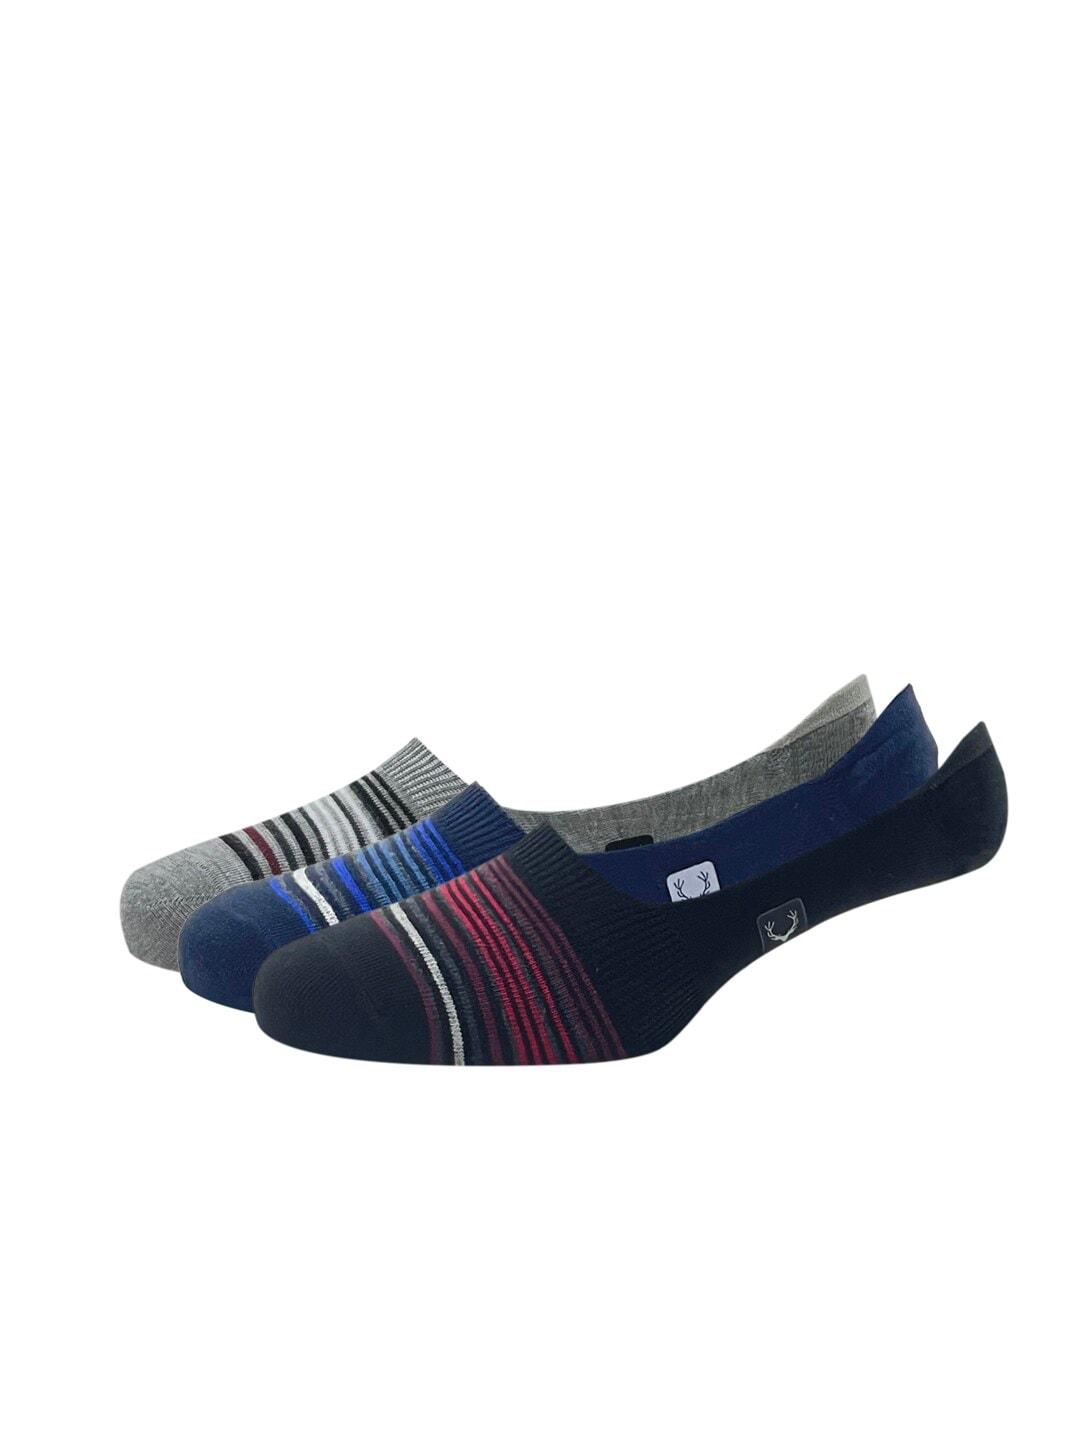 allen-solly-men-pack-of-3-patterned-shoe-liners